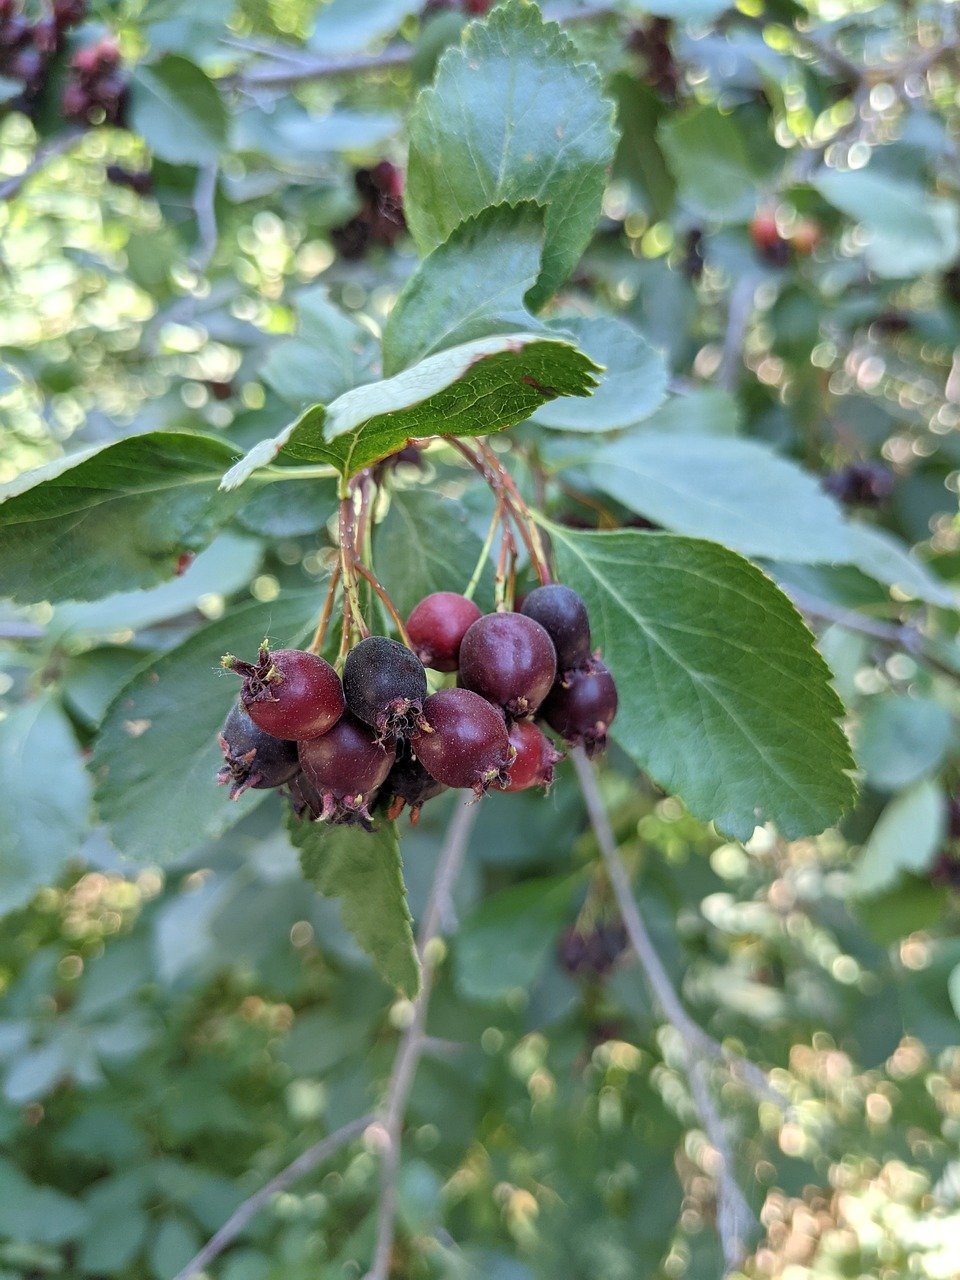 A cluster of ripe serviceberries, with deep red to purplish-black hues, hanging among green leaves in soft focus with dappled sunlight filtering through.